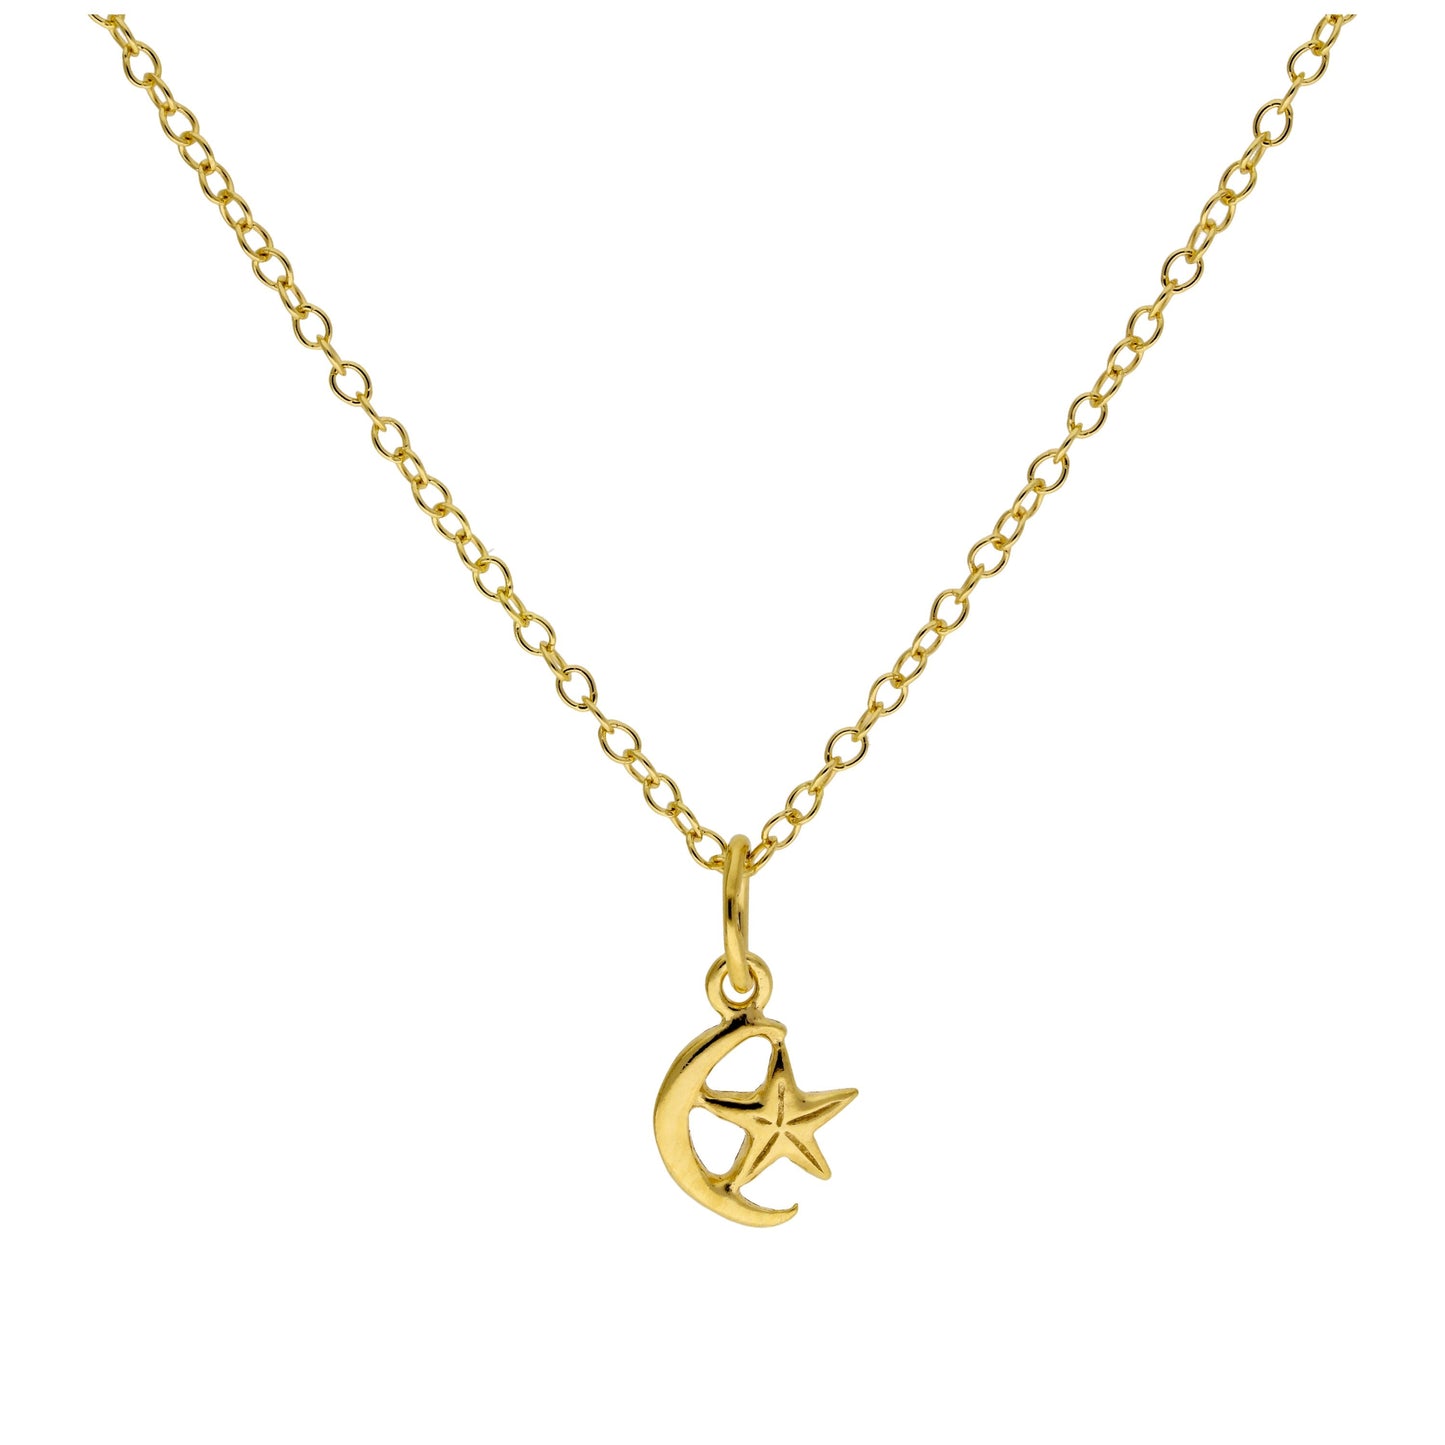 Gold Plated Tiny Sterling Silver Crescent Moon & Star Necklace 14 - 22 Inches